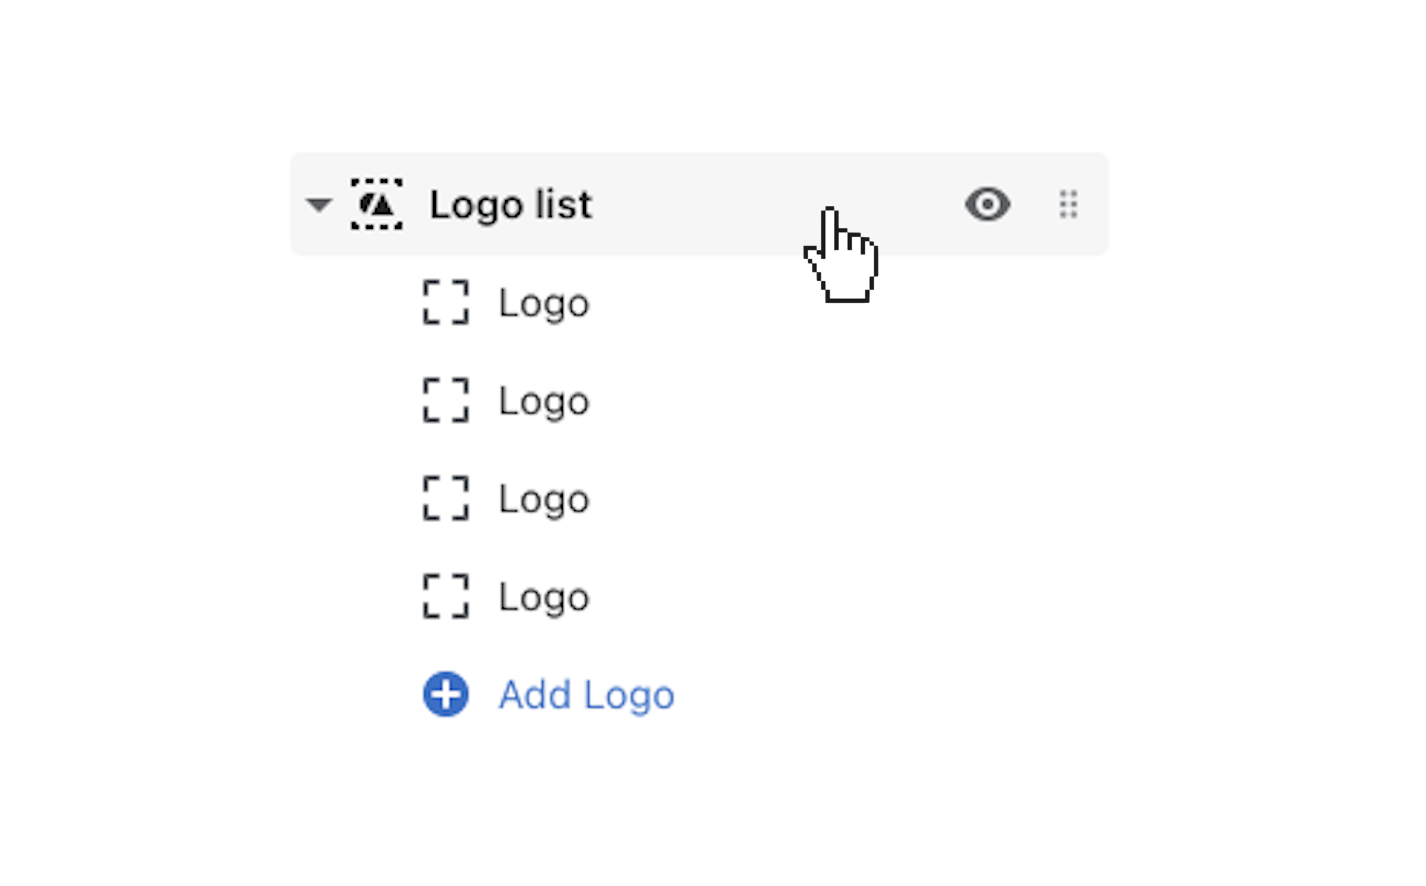 click_logo_list_to_open_section_settings.png